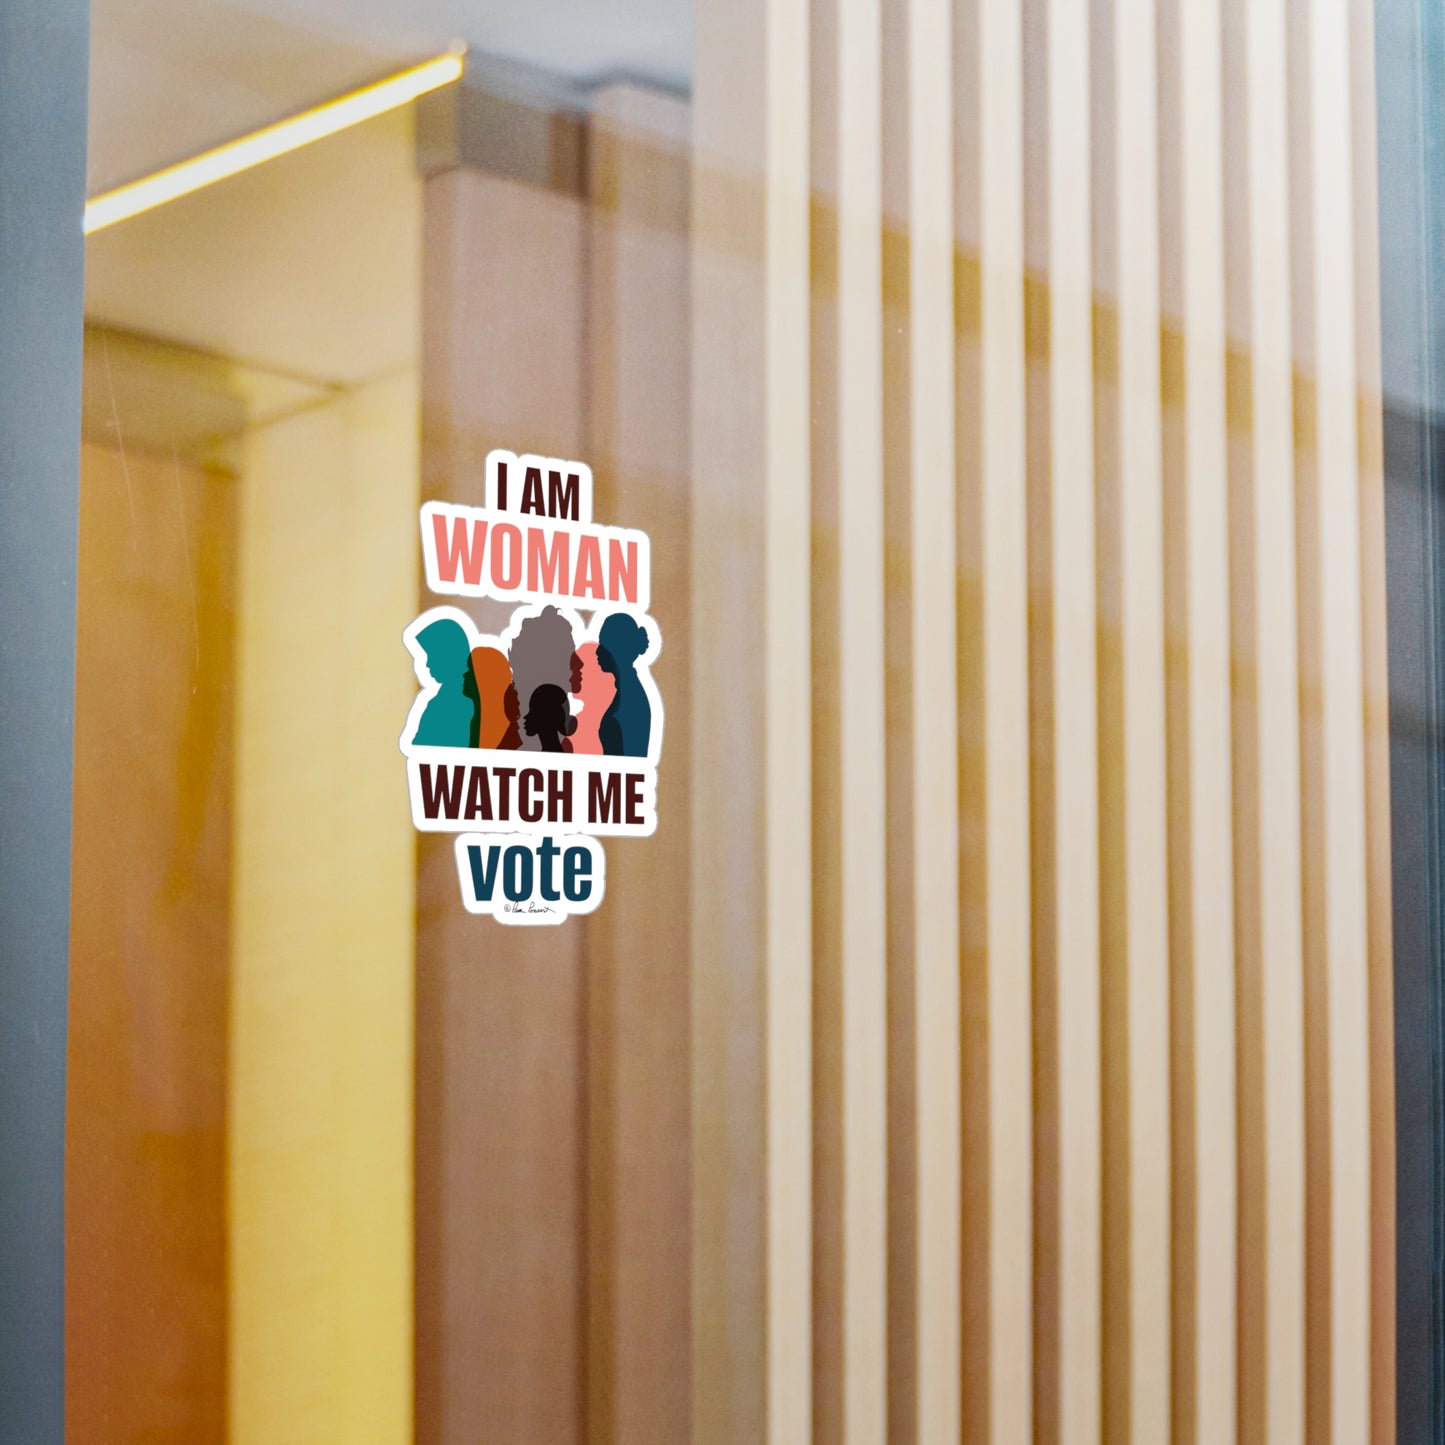 A Printify removable adhesive sticker on a glass window that reads "i am woman watch me vote," featuring silhouettes of three women, with a blurred background of vertical blinds.